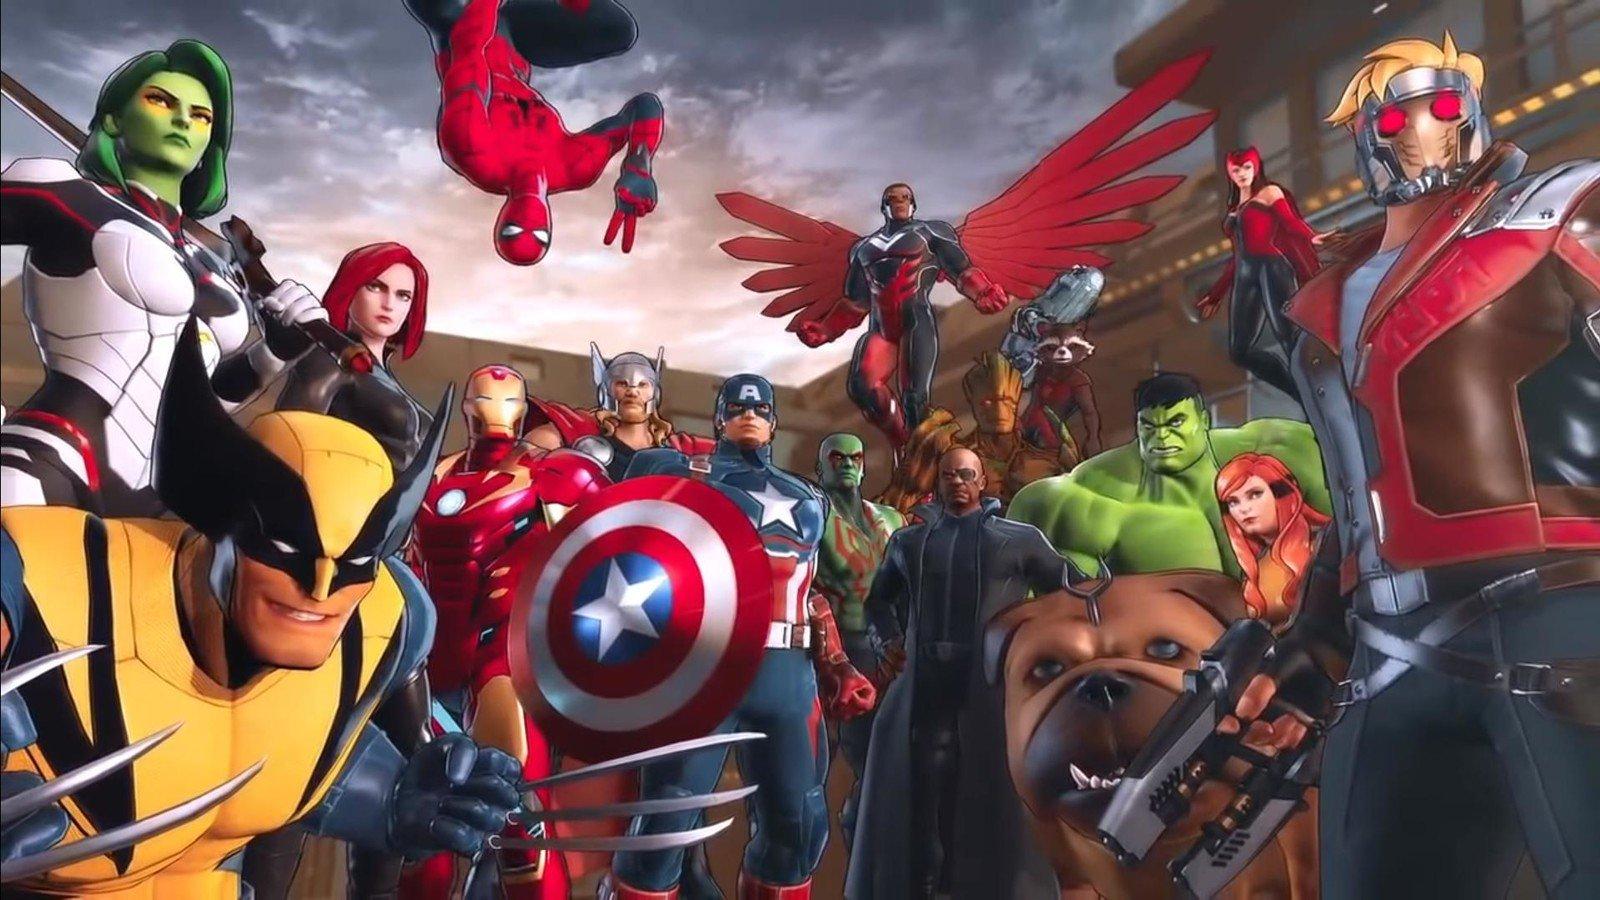 How many characters are there in Marvel Ultimate Alliance 3?